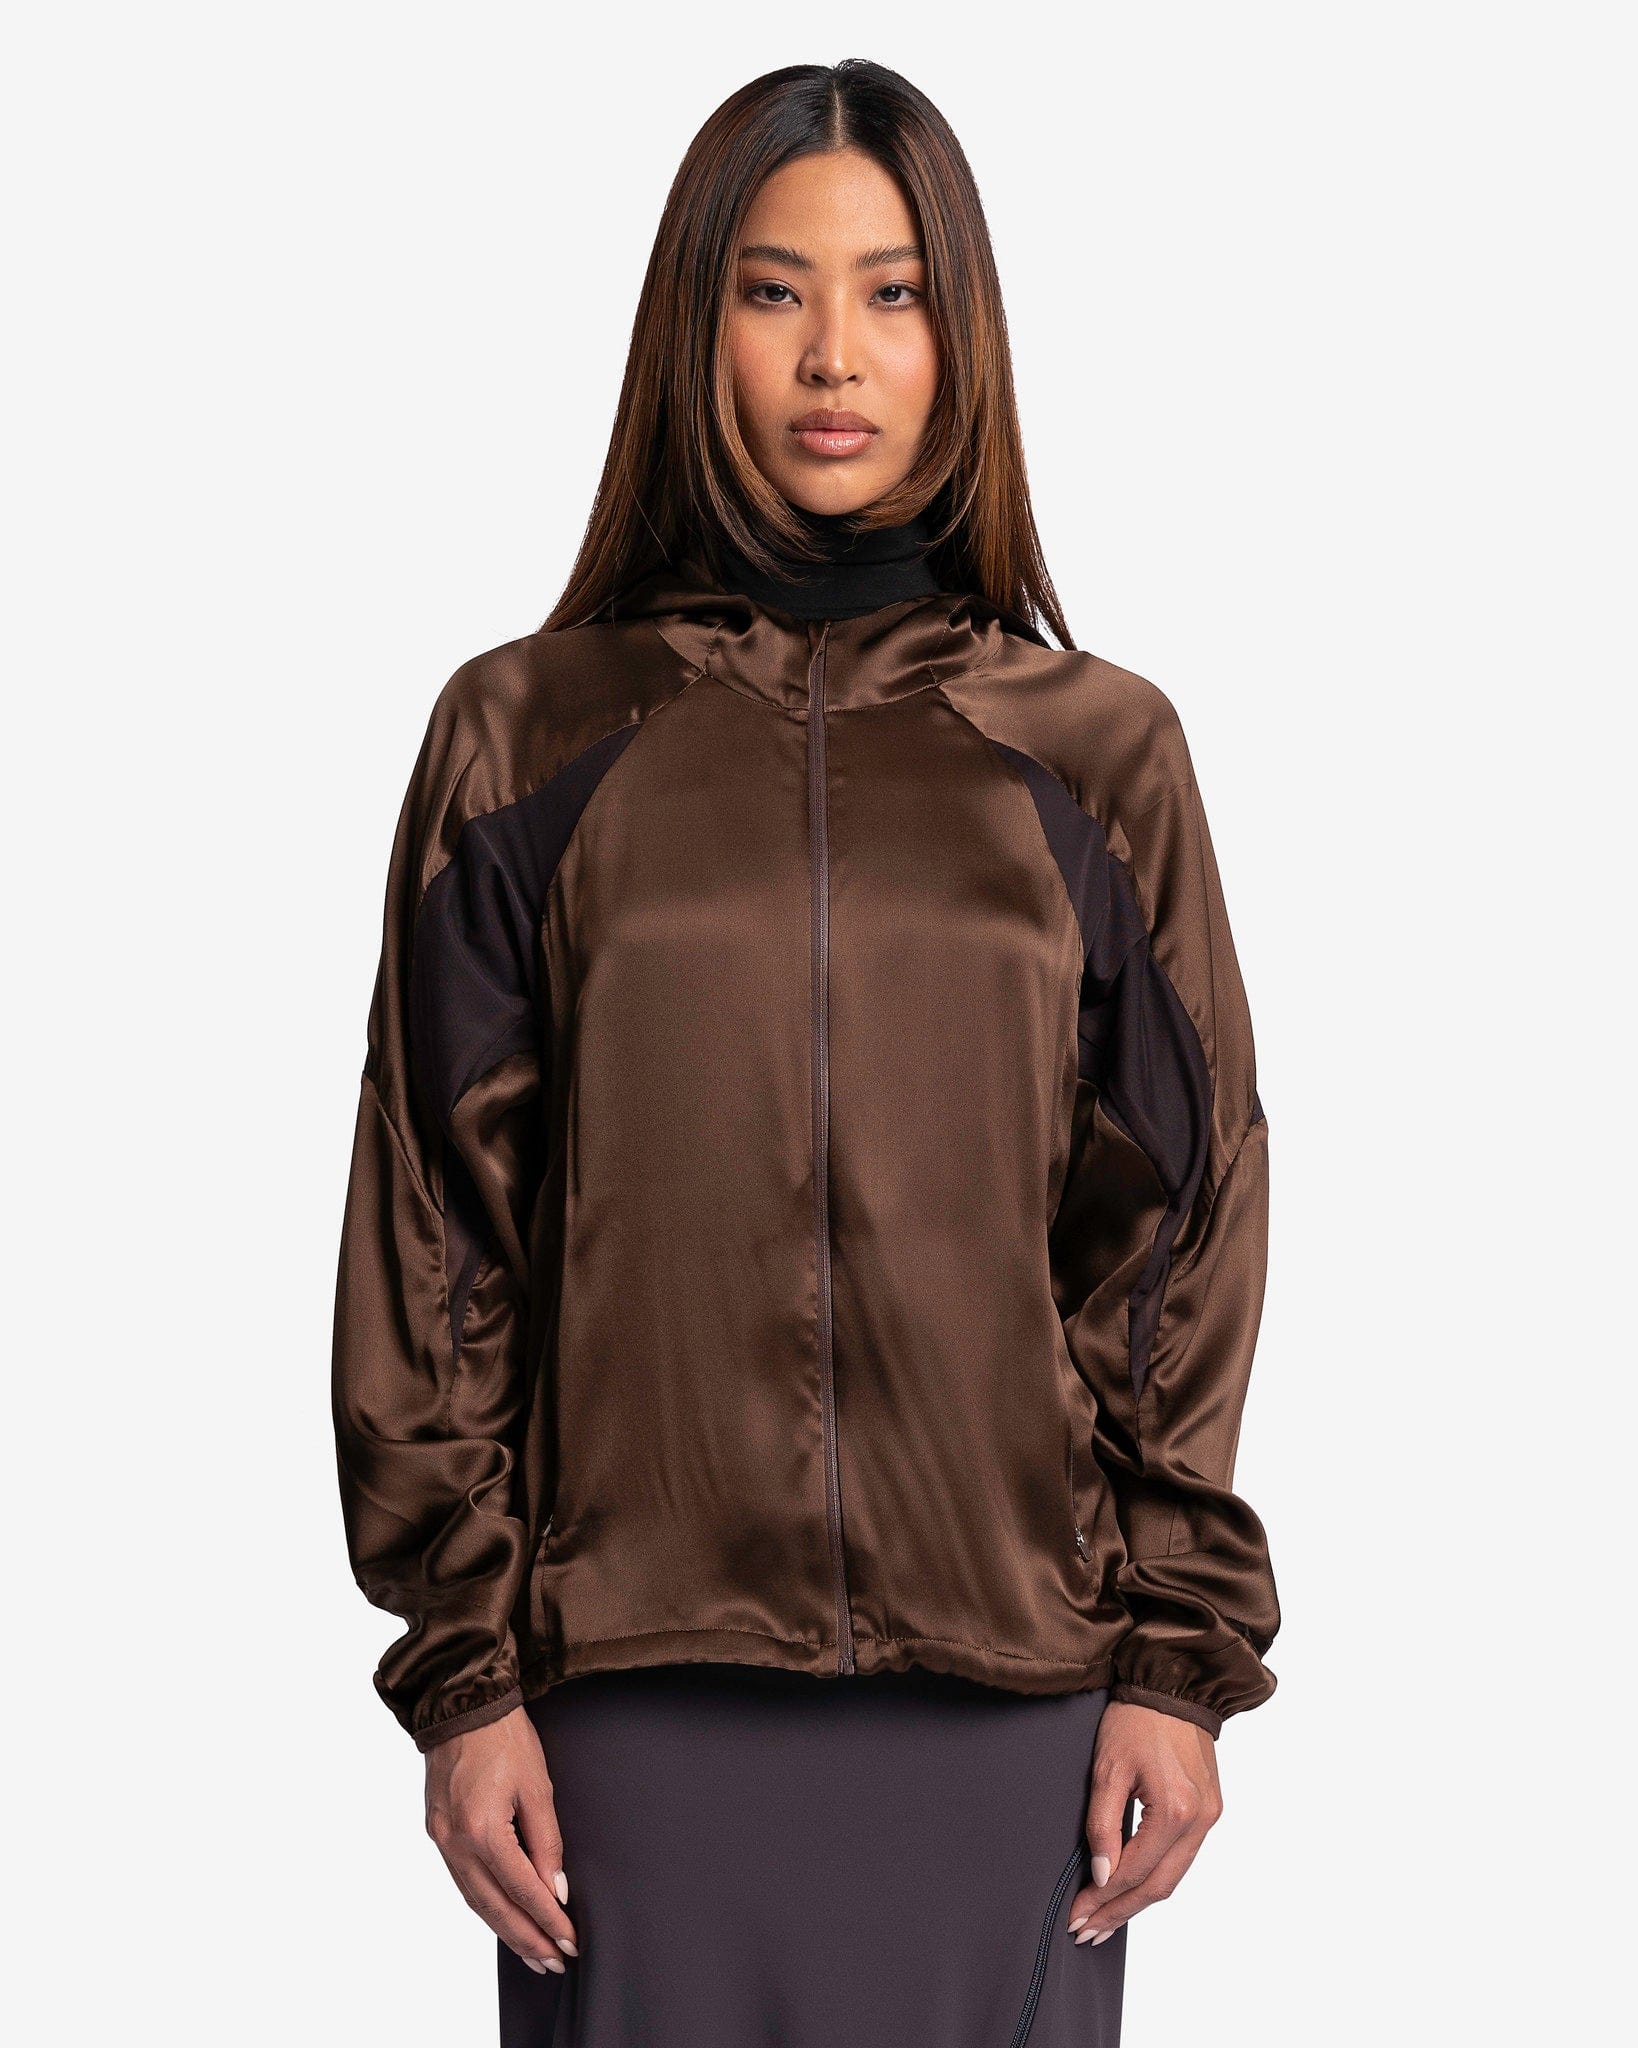 POST ARCHIVE FACTION (P.A.F) Women Jackets Women's 5.0+ Technical Jacket Right in Silk Brown